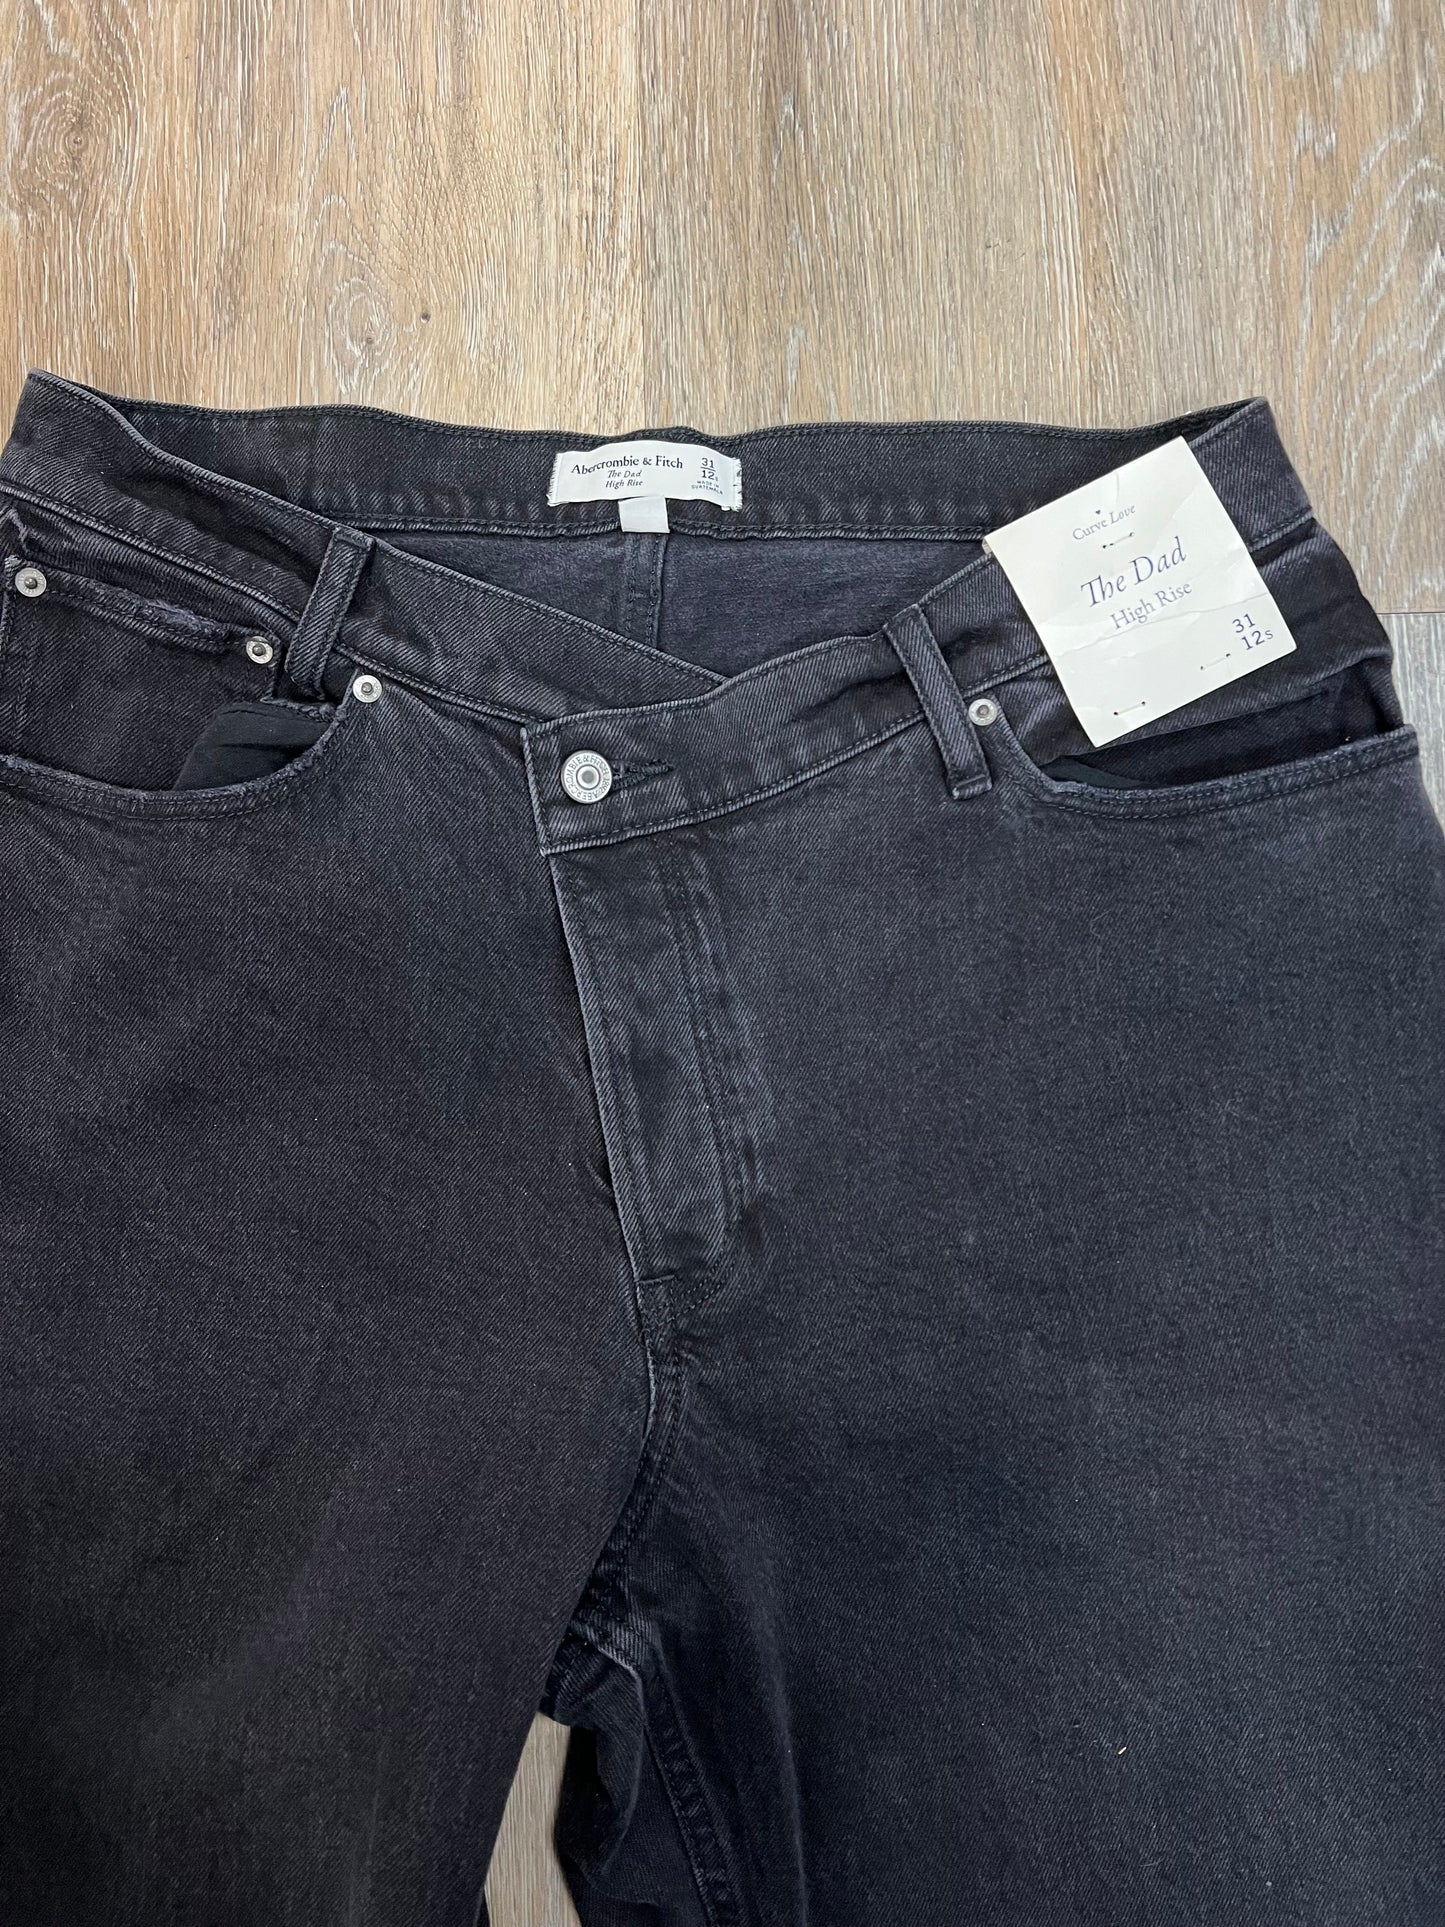 Jeans Straight By Abercrombie And Fitch  Size: 12 Short